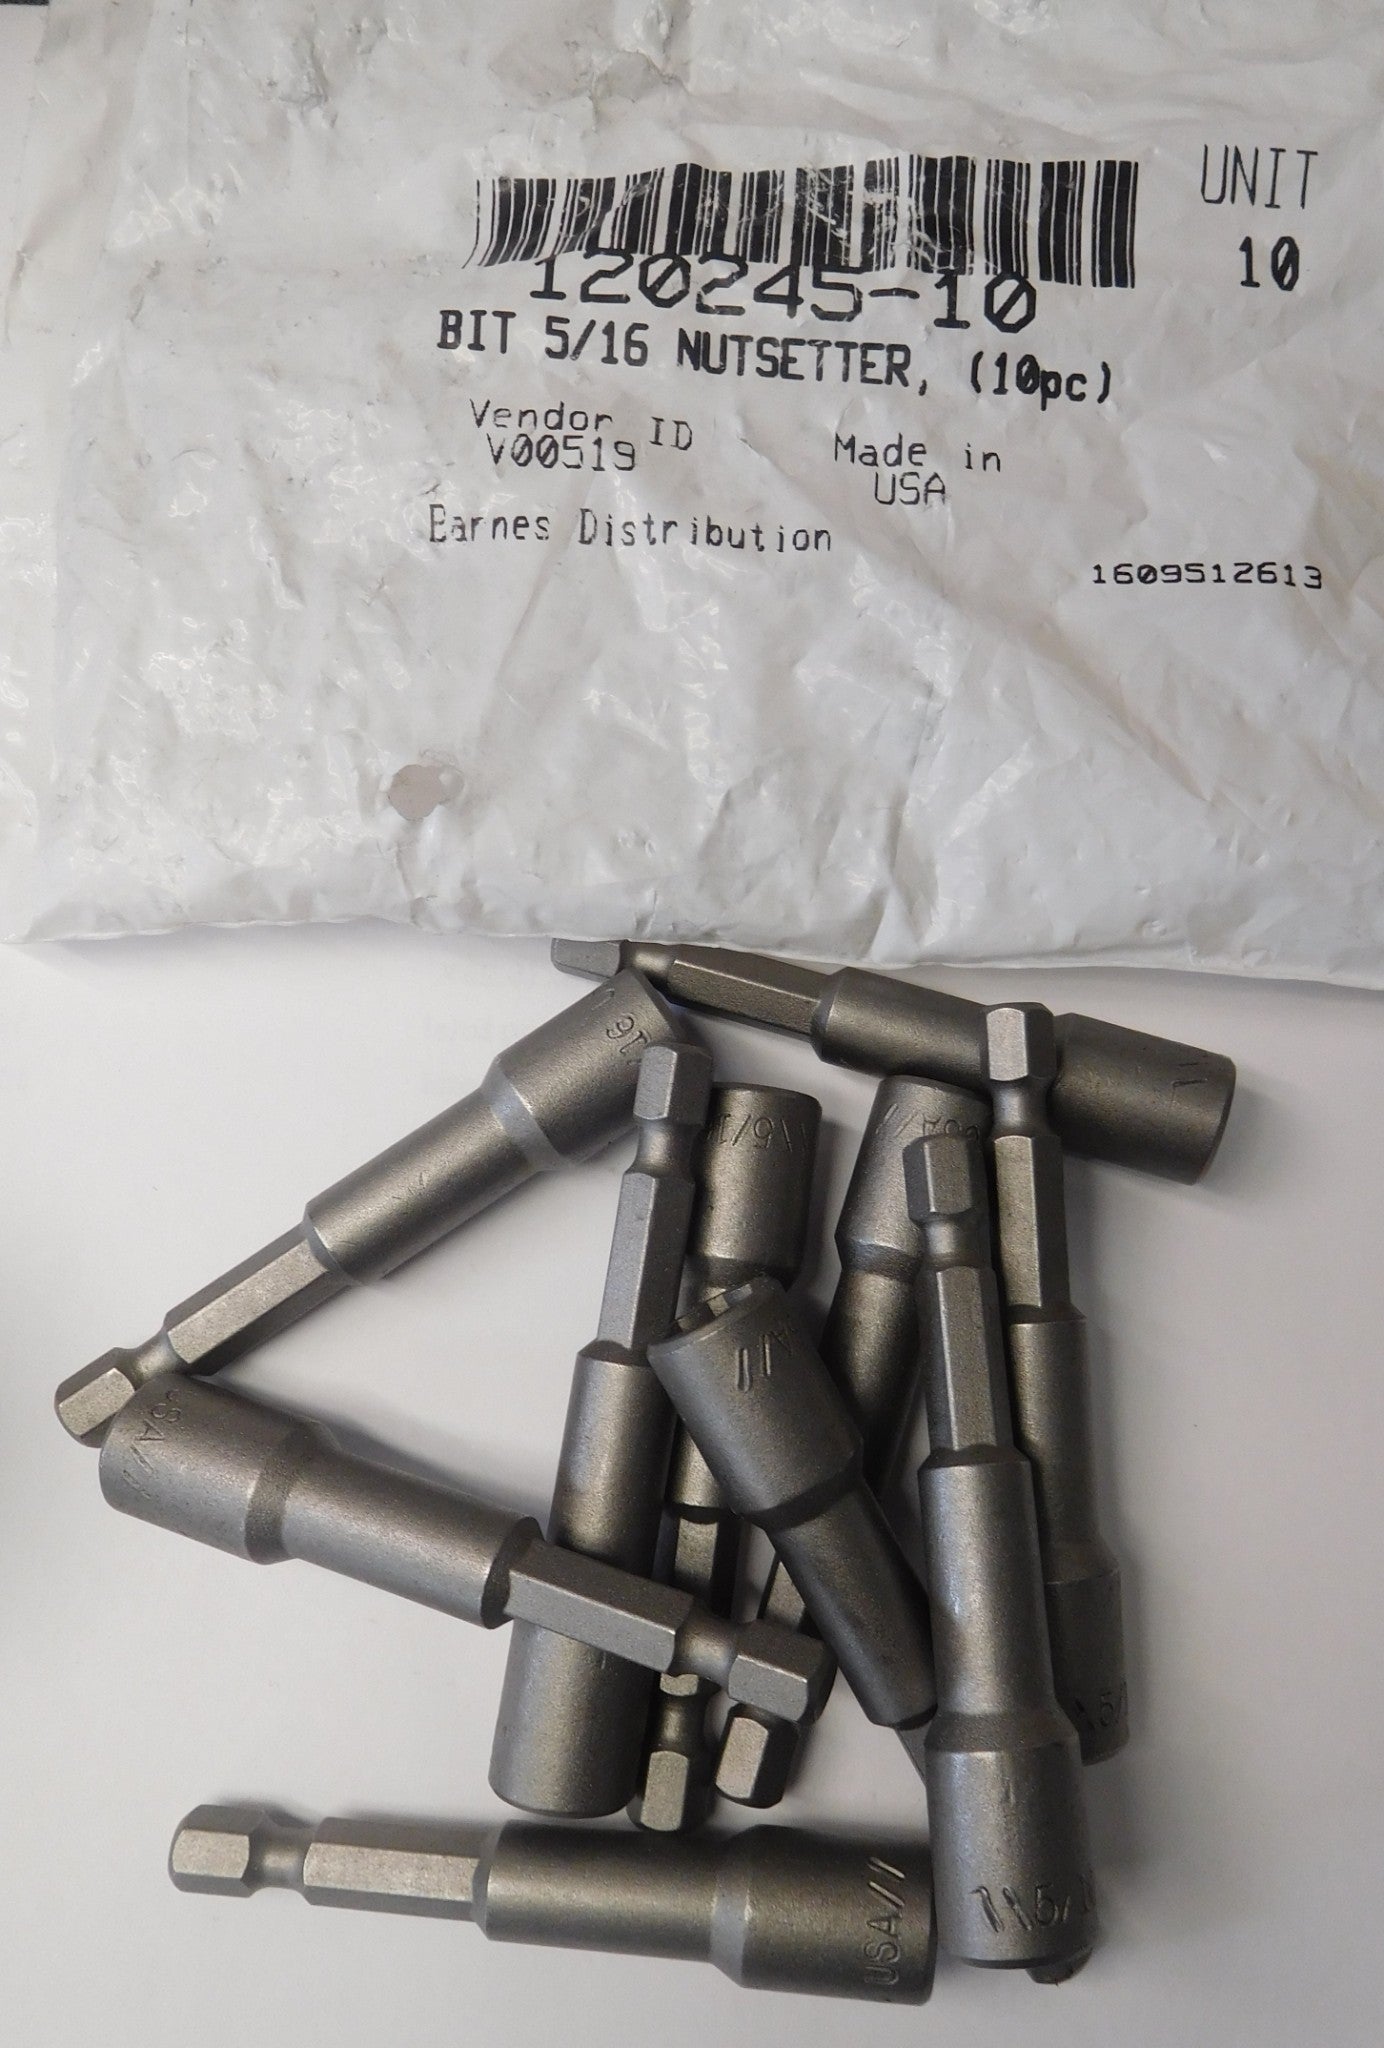 Bosch 120245 1609512613 5/16" x 2-9/16" Magnetic Nutsetters 10 Pack USA